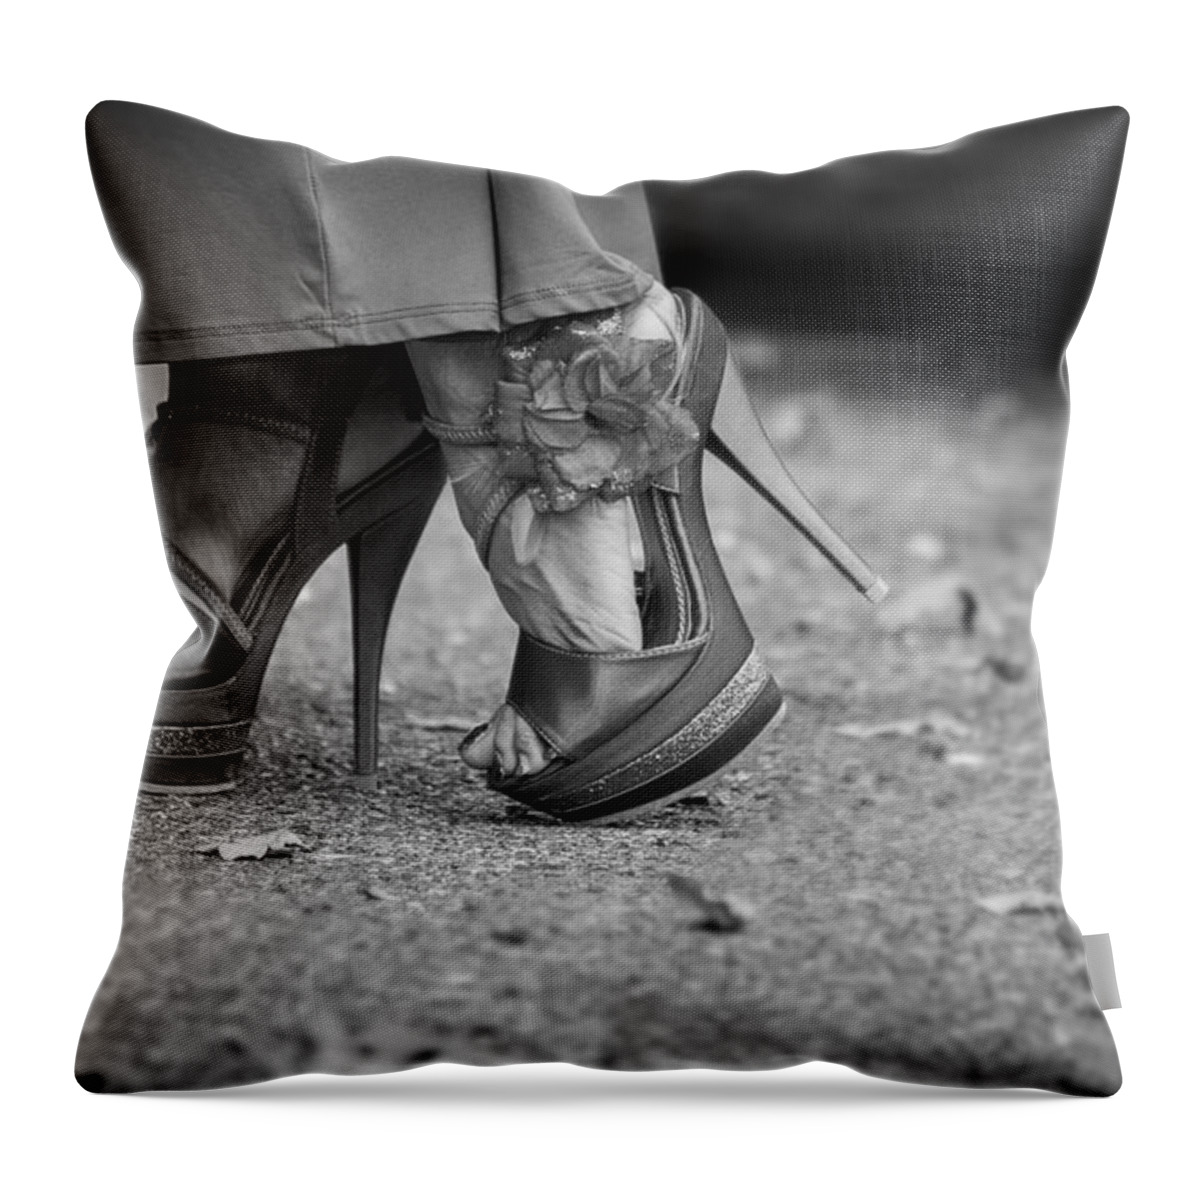 Fashion Throw Pillow featuring the photograph Walking In High Heels by Ester McGuire